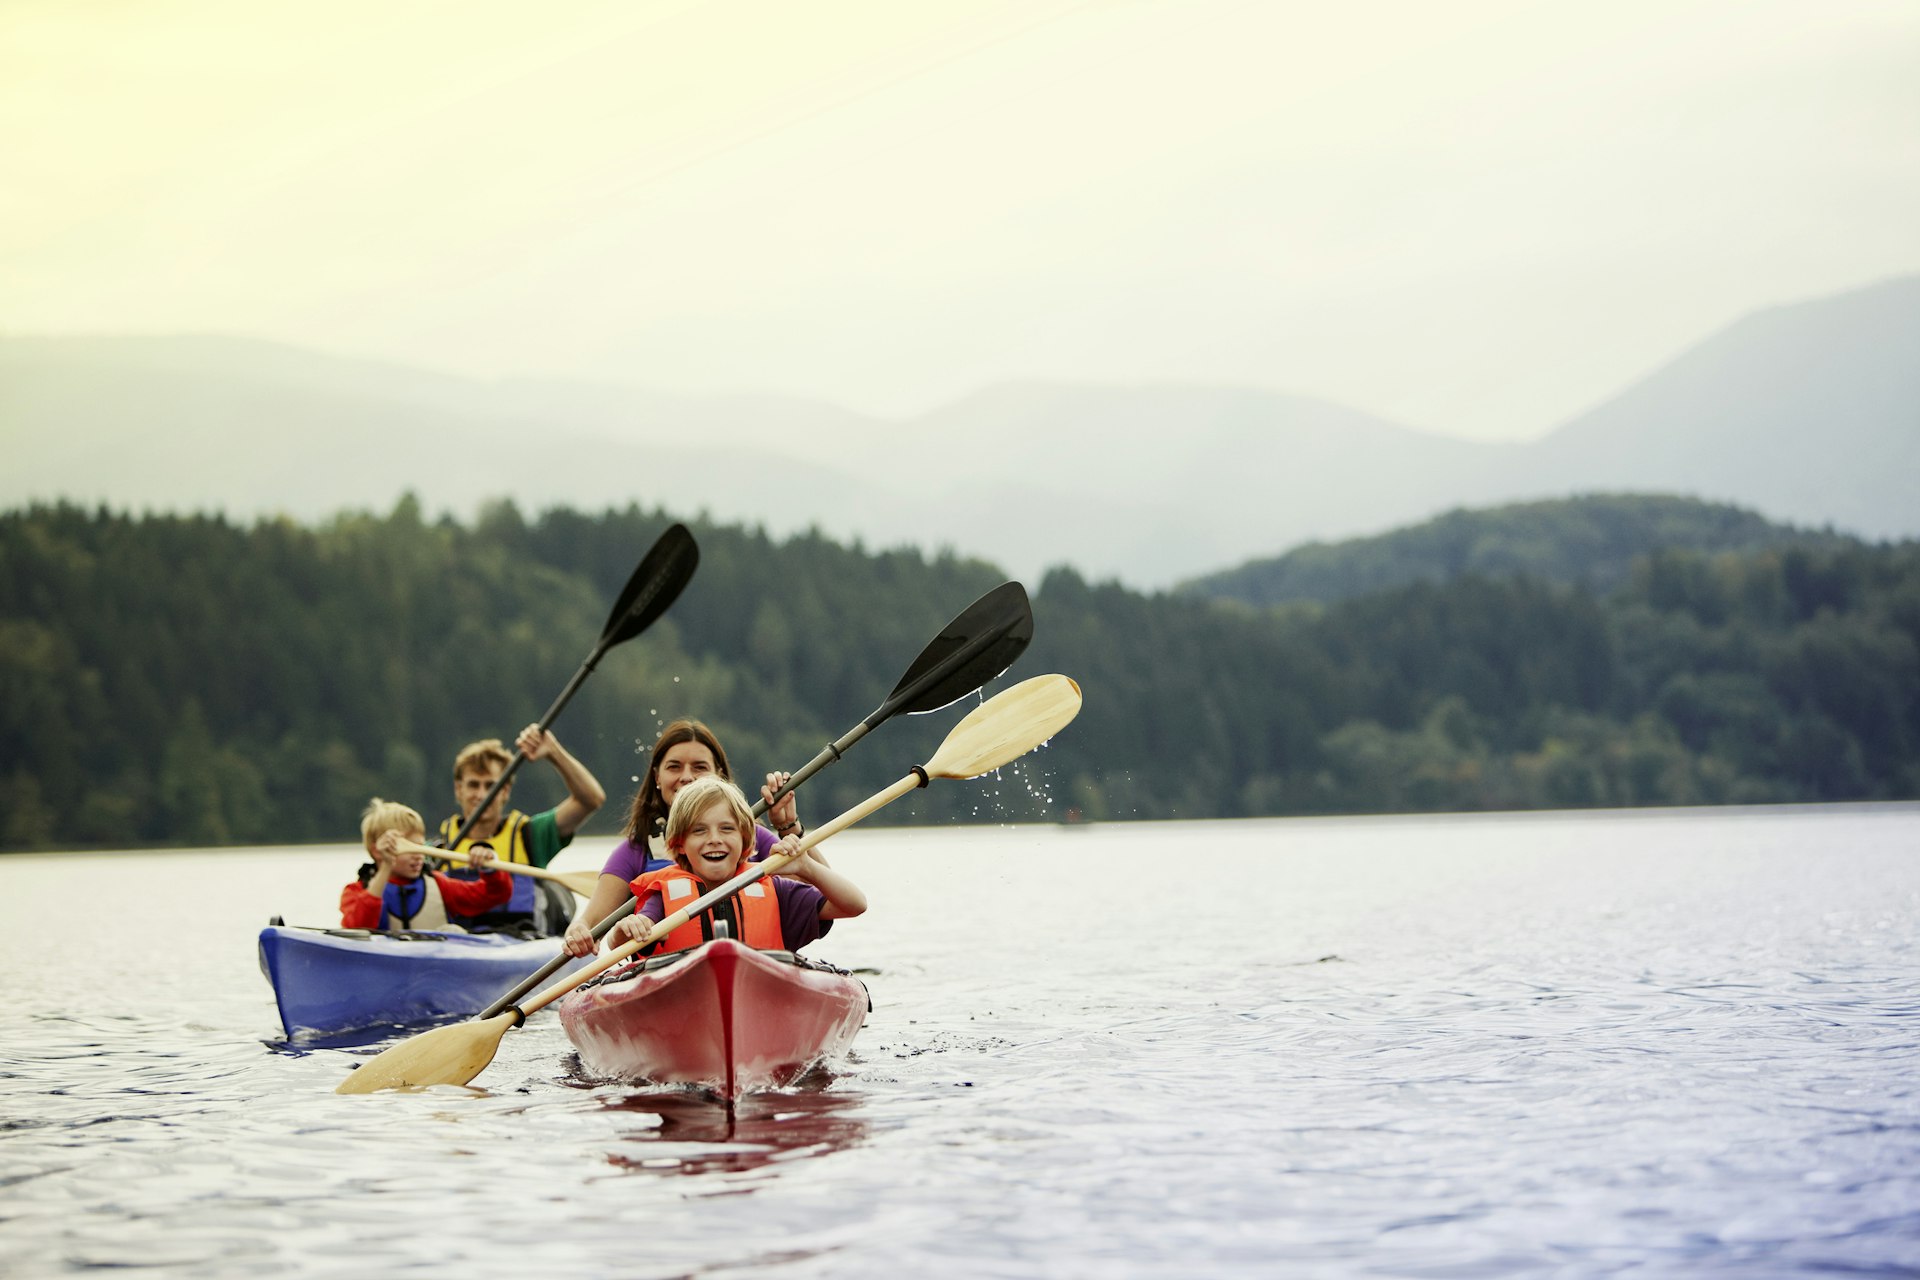 A family of two adults and two young children kayaking on a lake